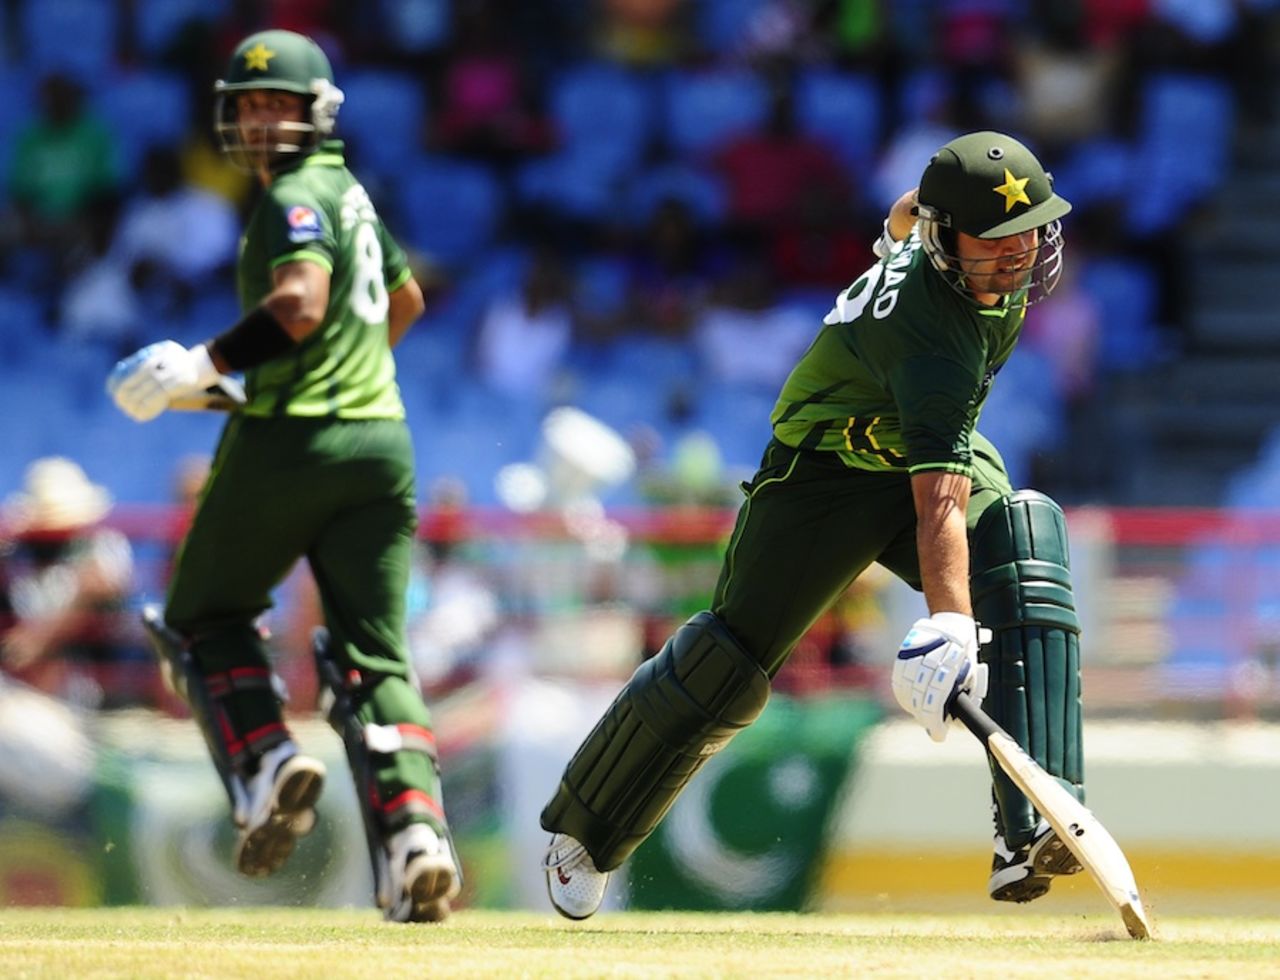 Ahmed Shehzad stretches to make his ground, West Indies v Pakistan, 2nd ODI, Gros Islet, April 25, 2011